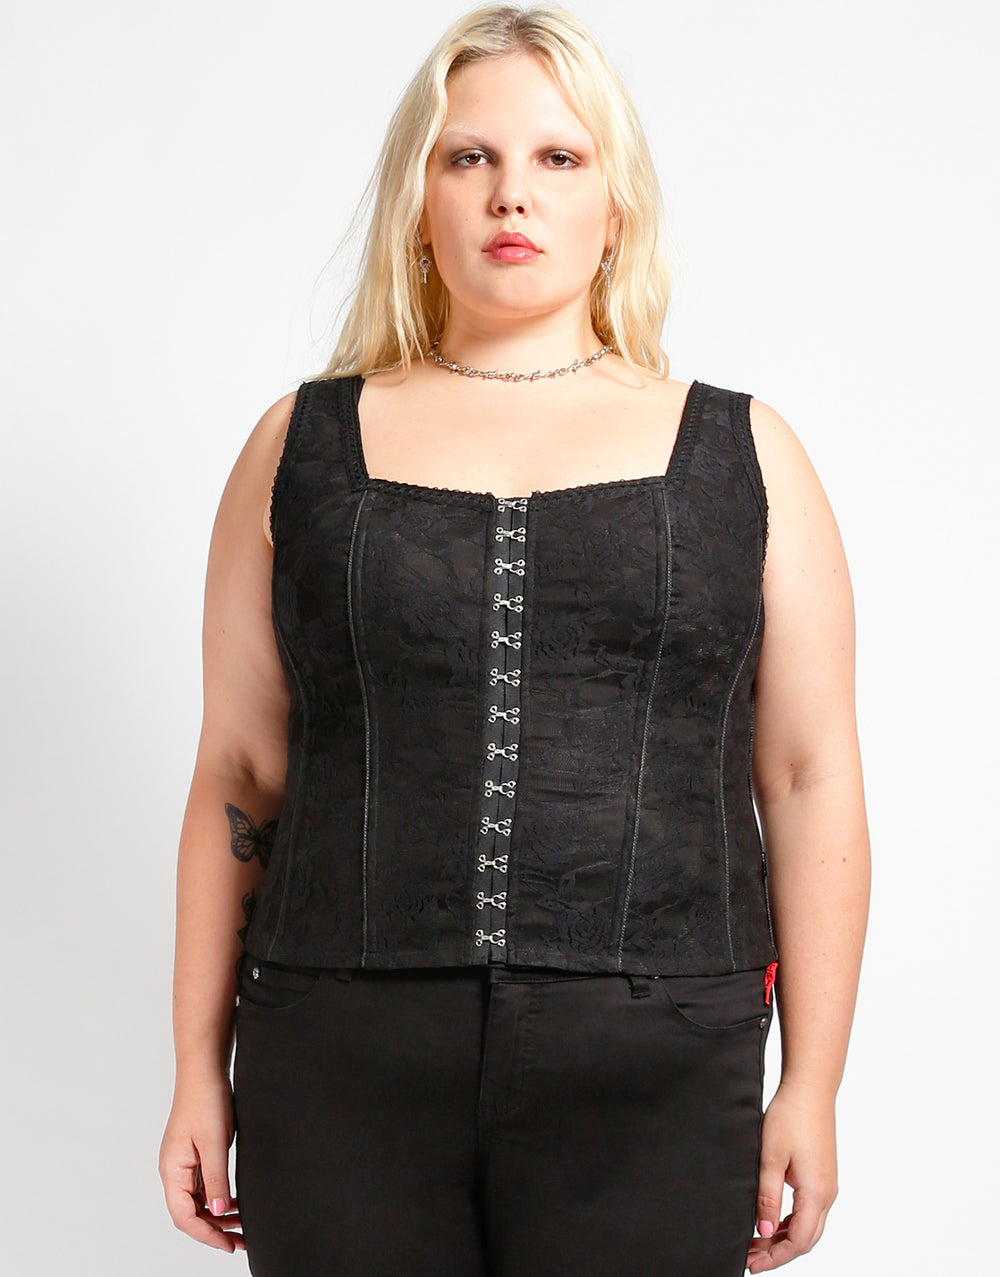 Dr. Shape's Corset with Hook and Eye - Shop Now